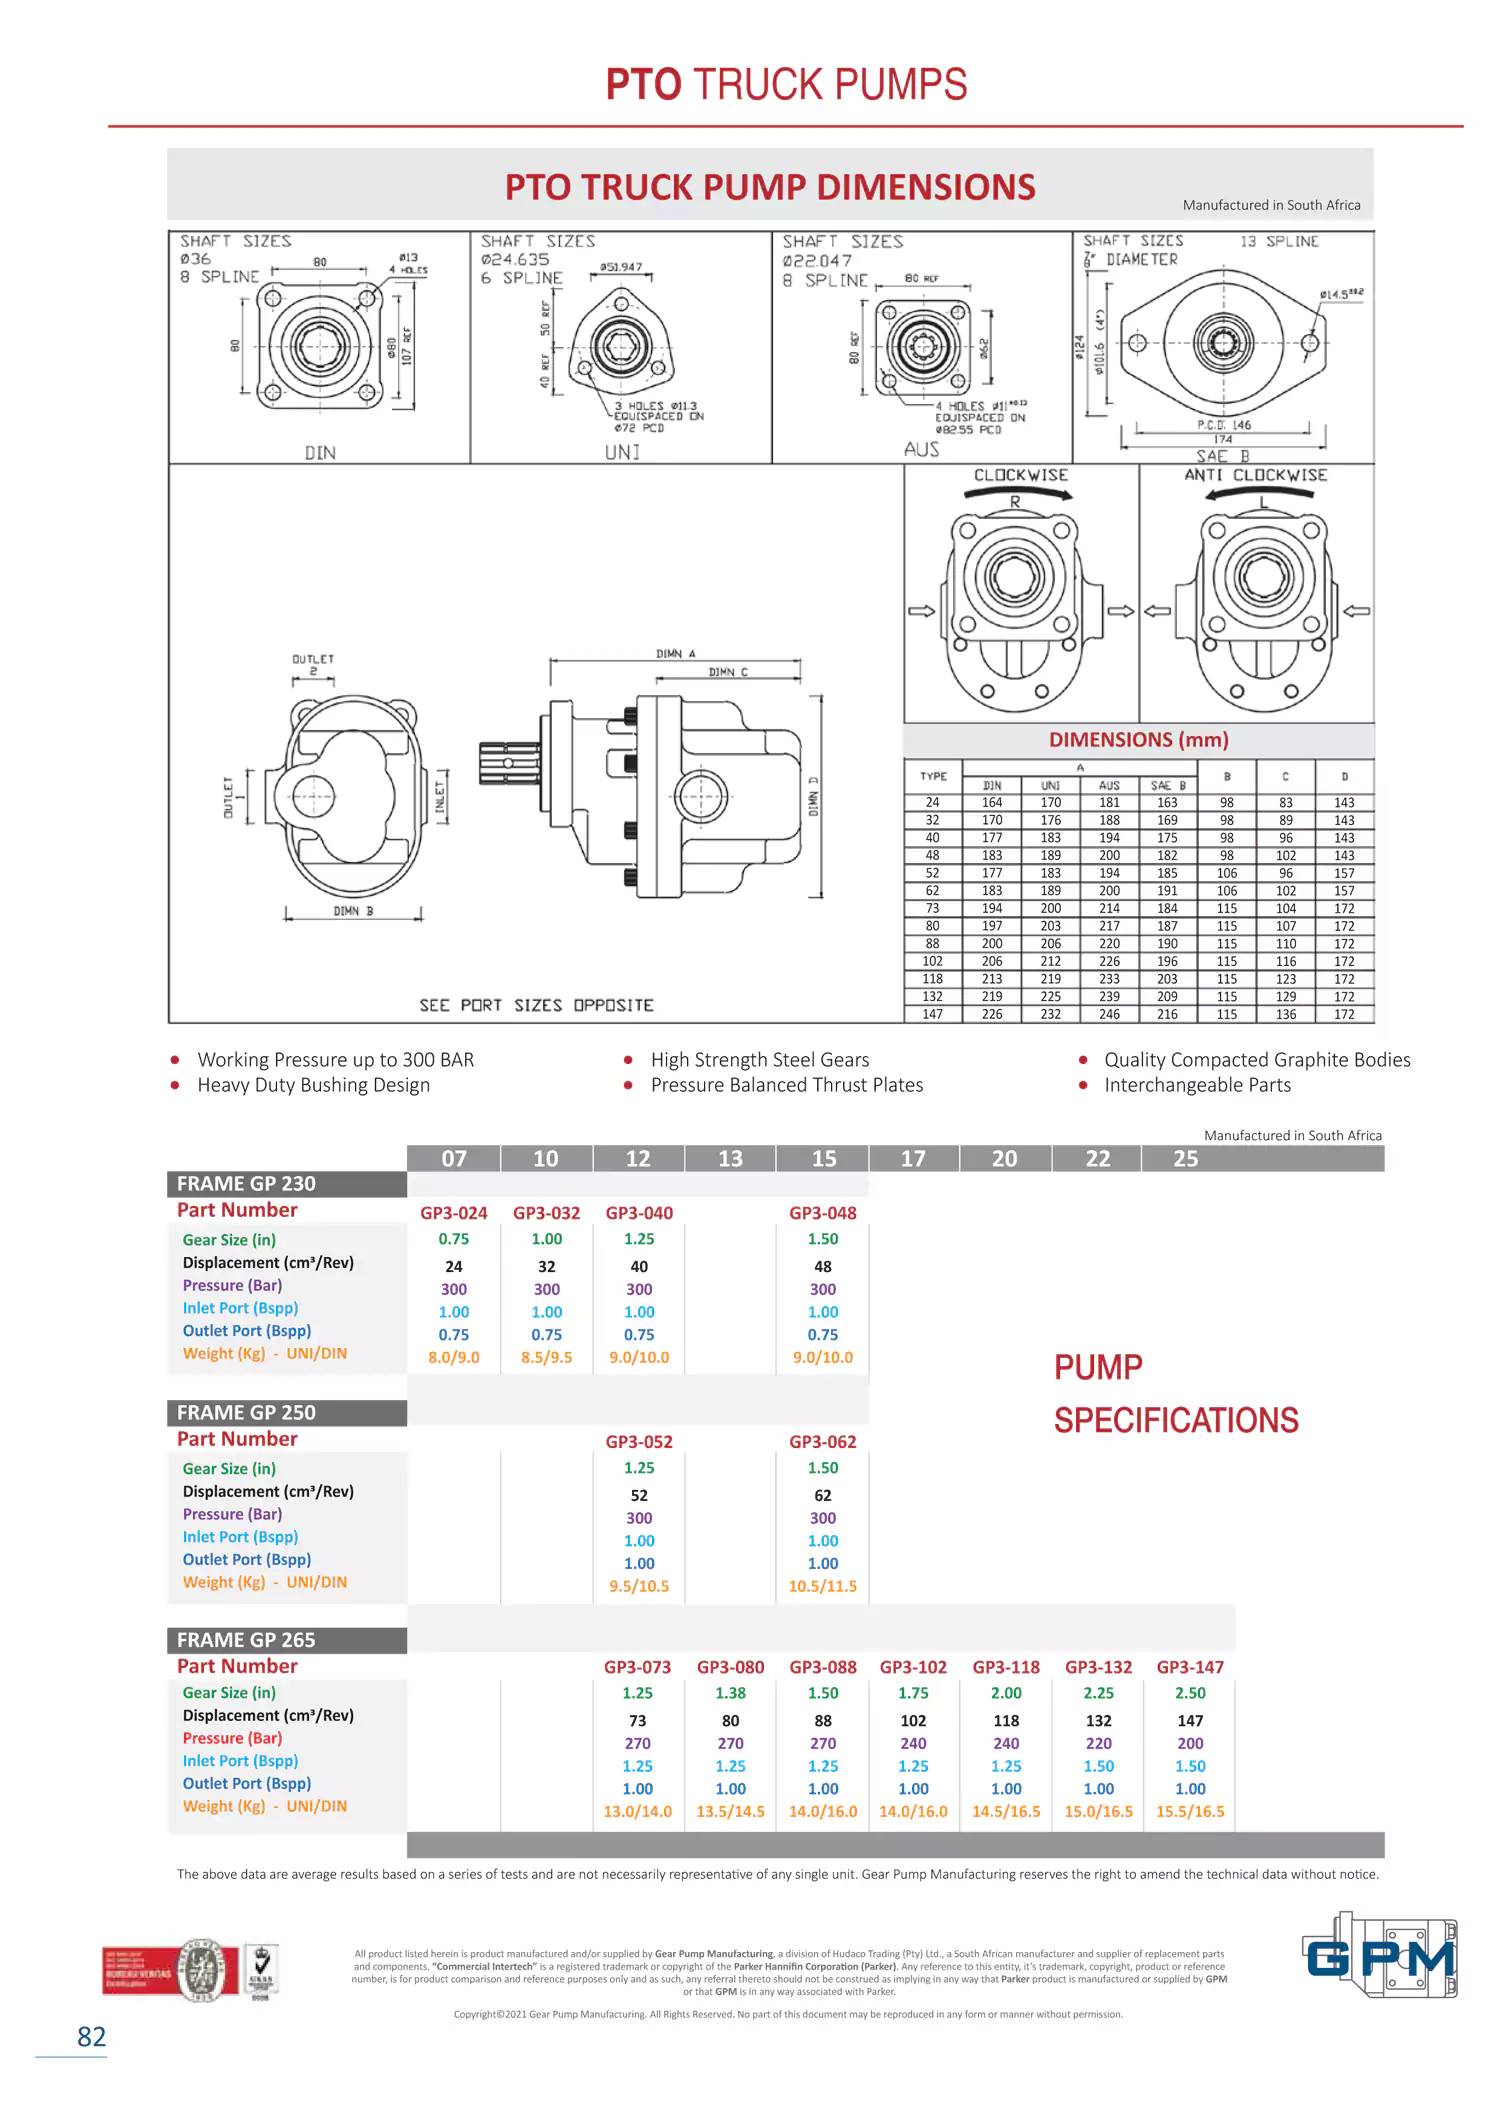 Page-82 - PTO Truck Pumps - Dimensions